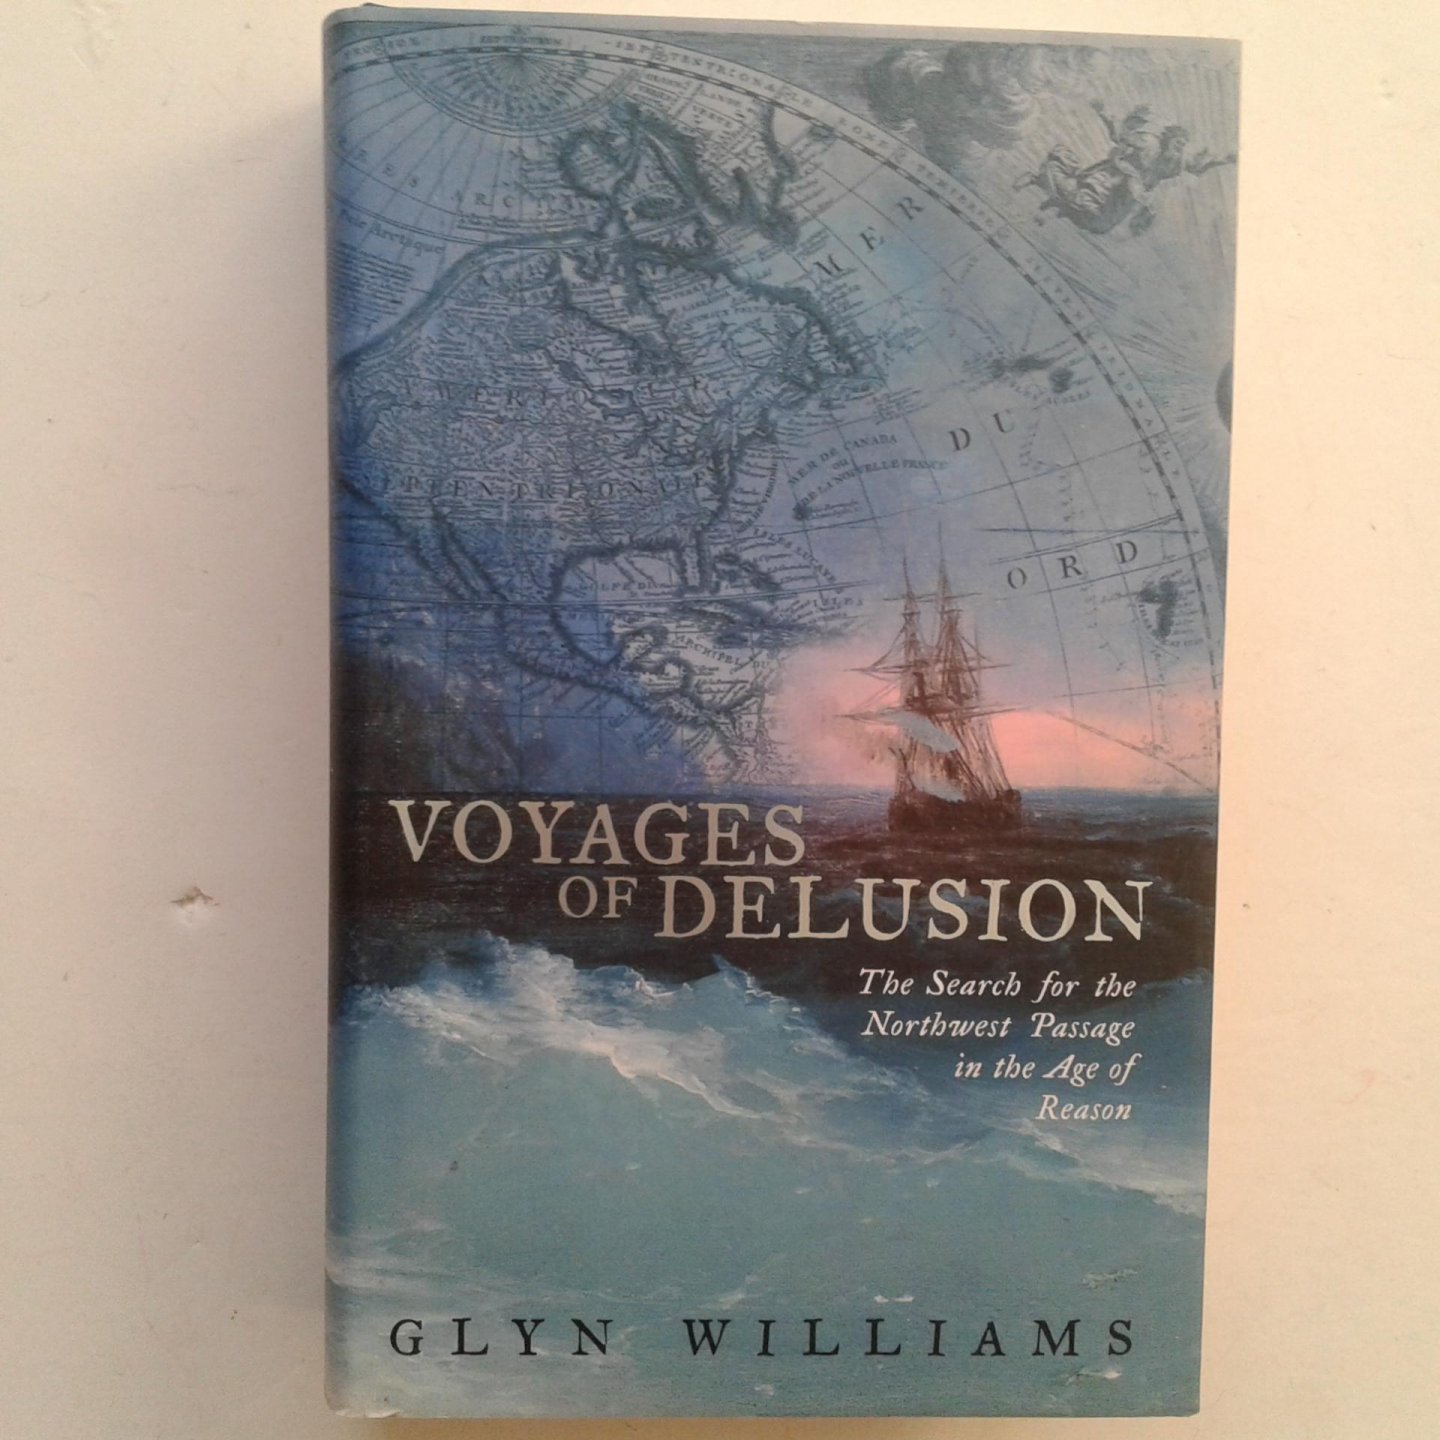 Williams, Glyn - Voyages of Delusion ; The Northwest Passage in the Age of Reason